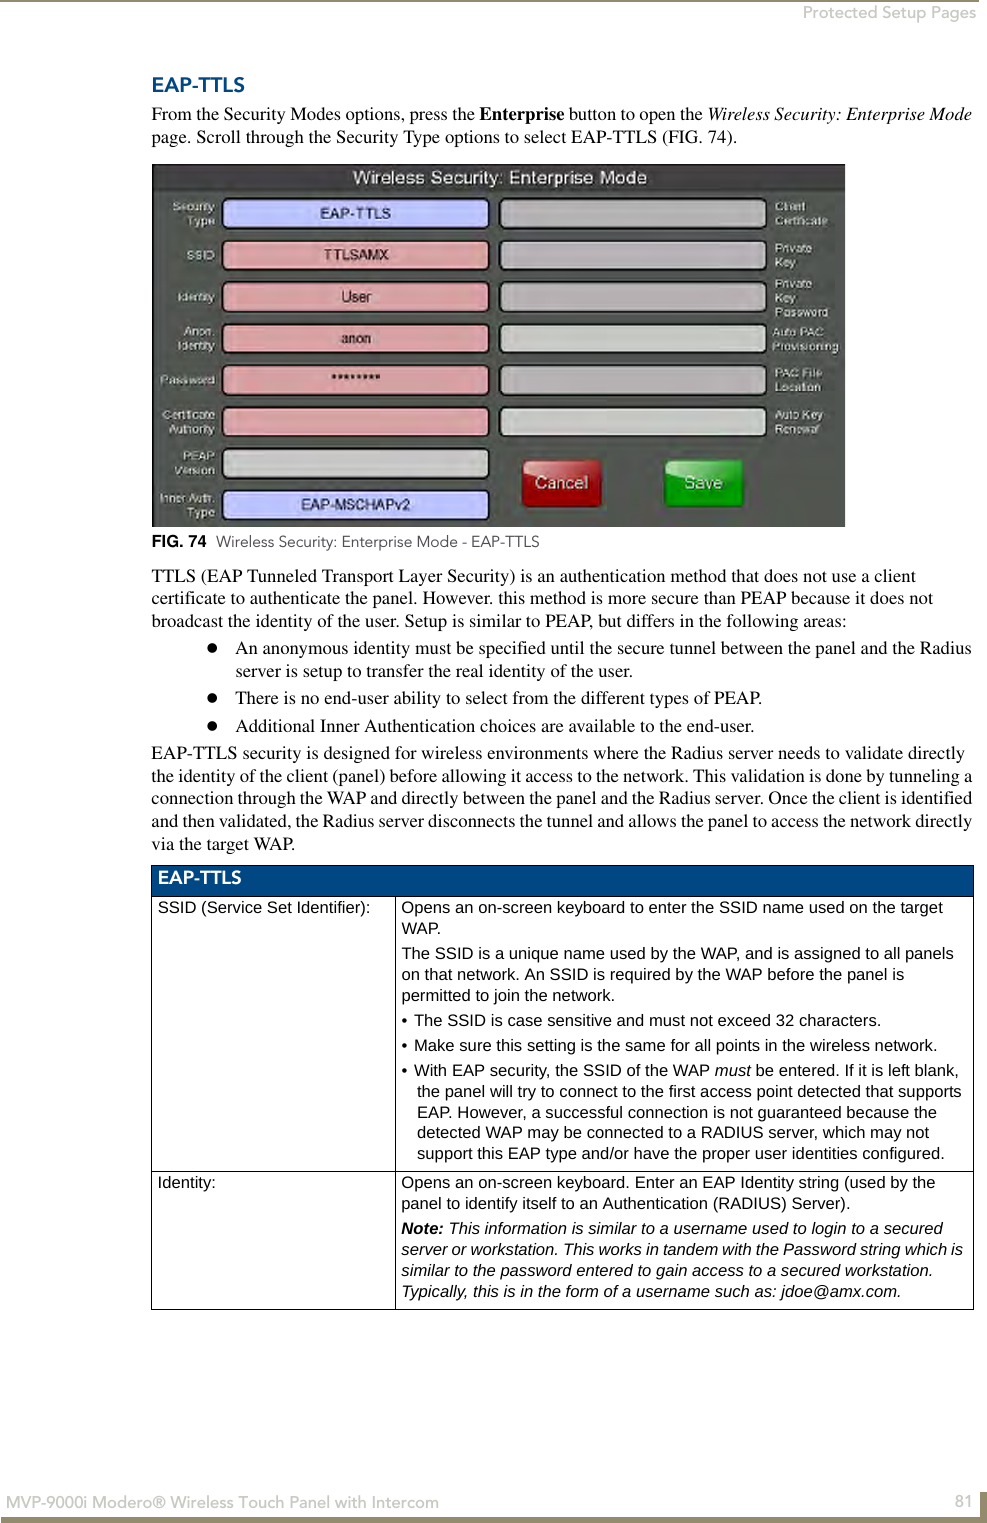 Protected Setup Pages81MVP-9000i Modero® Wireless Touch Panel with IntercomEAP-TTLSFrom the Security Modes options, press the Enterprise button to open the Wireless Security: Enterprise Mode page. Scroll through the Security Type options to select EAP-TTLS (FIG. 74).      TTLS (EAP Tunneled Transport Layer Security) is an authentication method that does not use a client certificate to authenticate the panel. However. this method is more secure than PEAP because it does not broadcast the identity of the user. Setup is similar to PEAP, but differs in the following areas: An anonymous identity must be specified until the secure tunnel between the panel and the Radius server is setup to transfer the real identity of the user.There is no end-user ability to select from the different types of PEAP.Additional Inner Authentication choices are available to the end-user.EAP-TTLS security is designed for wireless environments where the Radius server needs to validate directly the identity of the client (panel) before allowing it access to the network. This validation is done by tunneling a connection through the WAP and directly between the panel and the Radius server. Once the client is identified and then validated, the Radius server disconnects the tunnel and allows the panel to access the network directly via the target WAP.   FIG. 74  Wireless Security: Enterprise Mode - EAP-TTLSEAP-TTLSSSID (Service Set Identifier): Opens an on-screen keyboard to enter the SSID name used on the target WAP. The SSID is a unique name used by the WAP, and is assigned to all panels on that network. An SSID is required by the WAP before the panel is permitted to join the network. • The SSID is case sensitive and must not exceed 32 characters. • Make sure this setting is the same for all points in the wireless network.• With EAP security, the SSID of the WAP must be entered. If it is left blank, the panel will try to connect to the first access point detected that supports EAP. However, a successful connection is not guaranteed because the detected WAP may be connected to a RADIUS server, which may not support this EAP type and/or have the proper user identities configured.Identity: Opens an on-screen keyboard. Enter an EAP Identity string (used by the panel to identify itself to an Authentication (RADIUS) Server). Note: This information is similar to a username used to login to a secured server or workstation. This works in tandem with the Password string which is similar to the password entered to gain access to a secured workstation. Typically, this is in the form of a username such as: jdoe@amx.com.